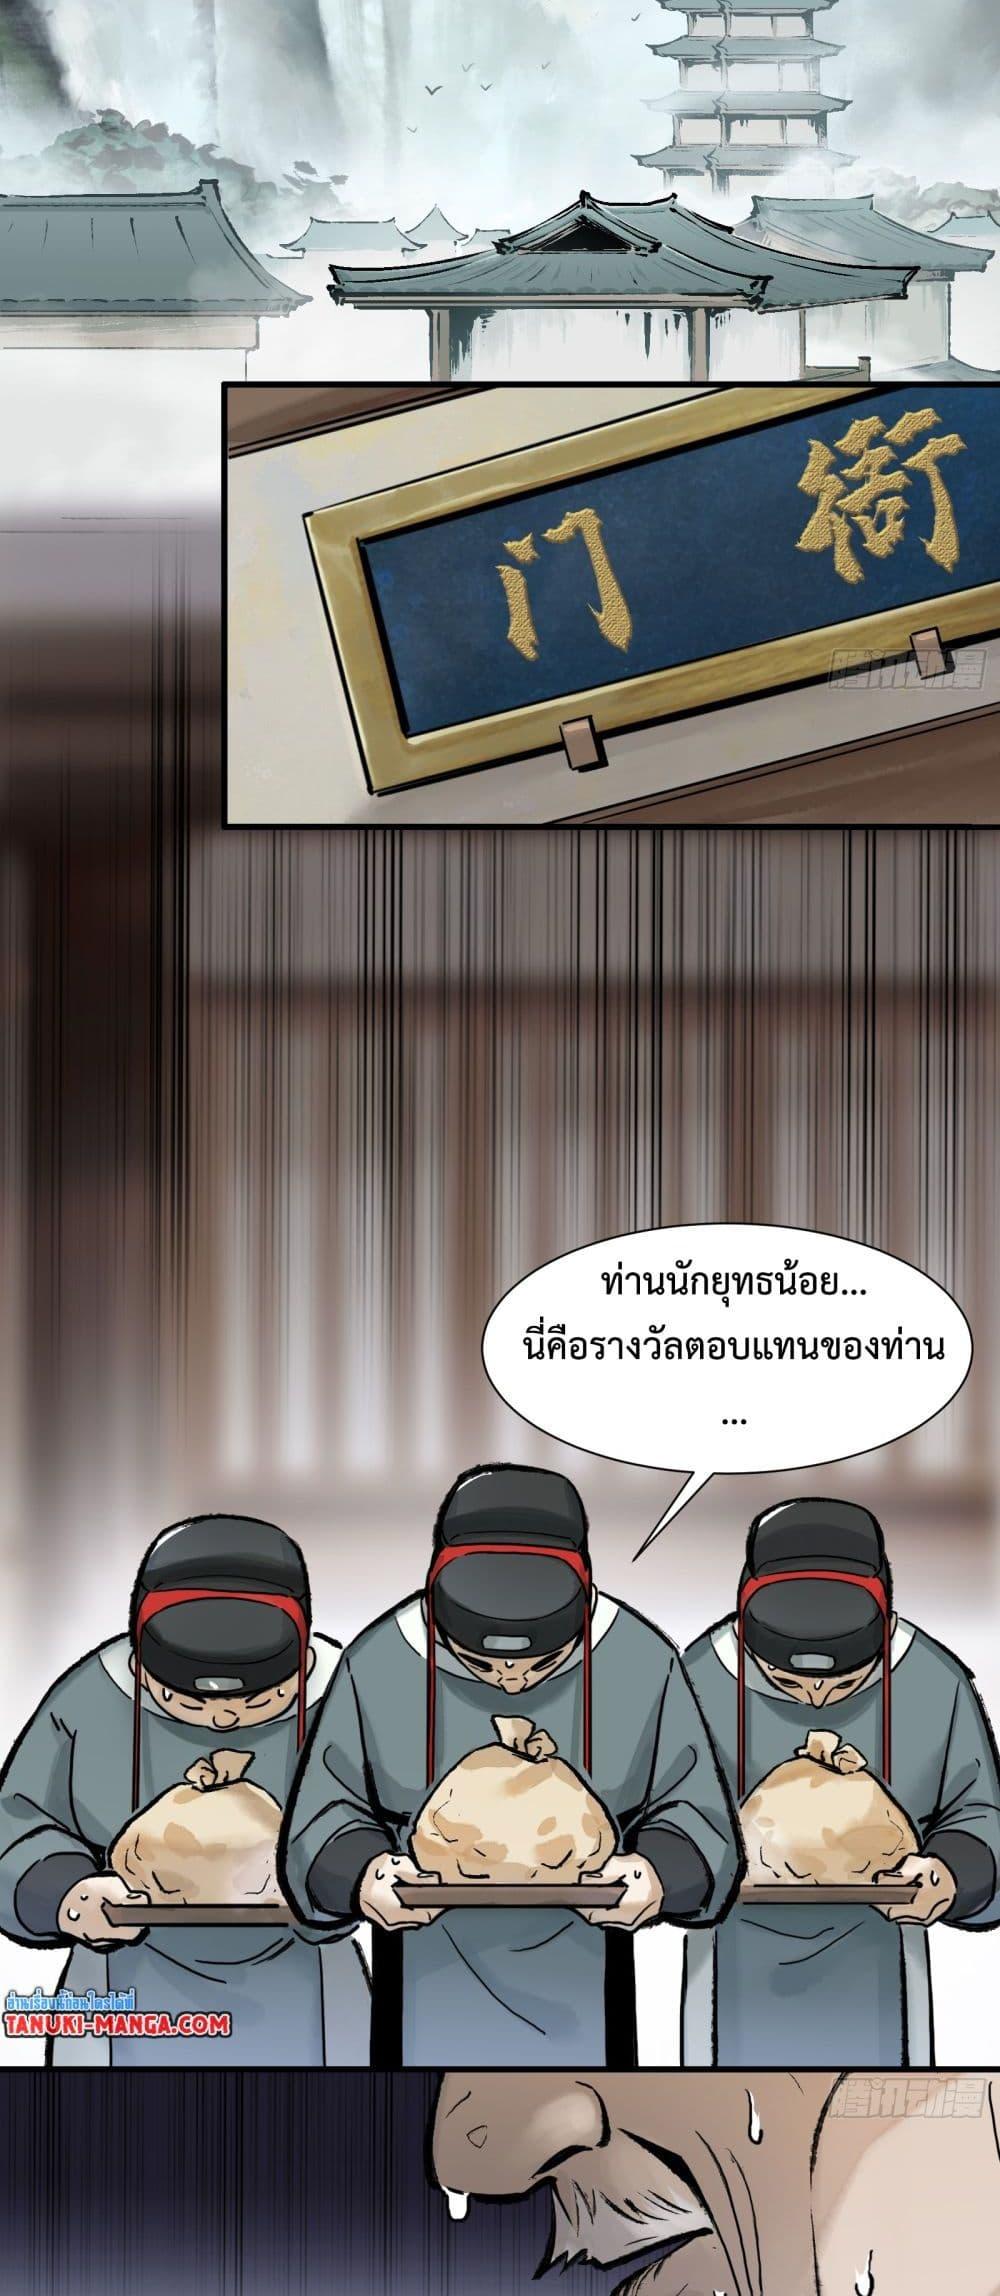 A Thought Of Freedom ตอนที่ 2 (2)